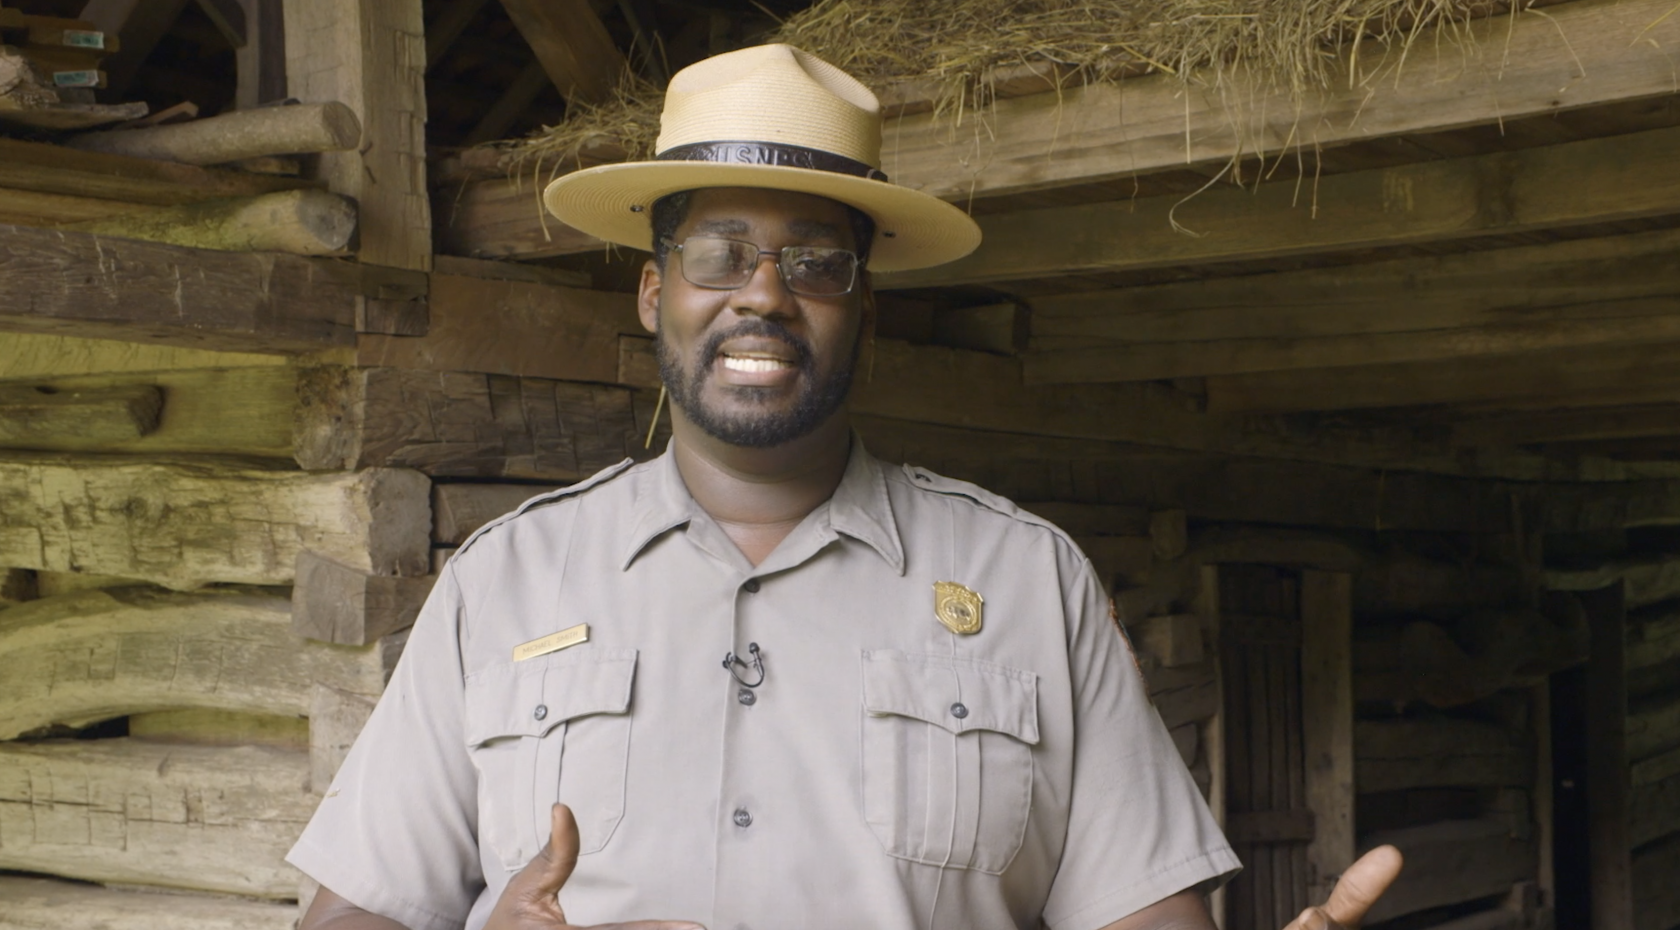 NPS employee Michael Smith stands in uniform and smiles at the camera